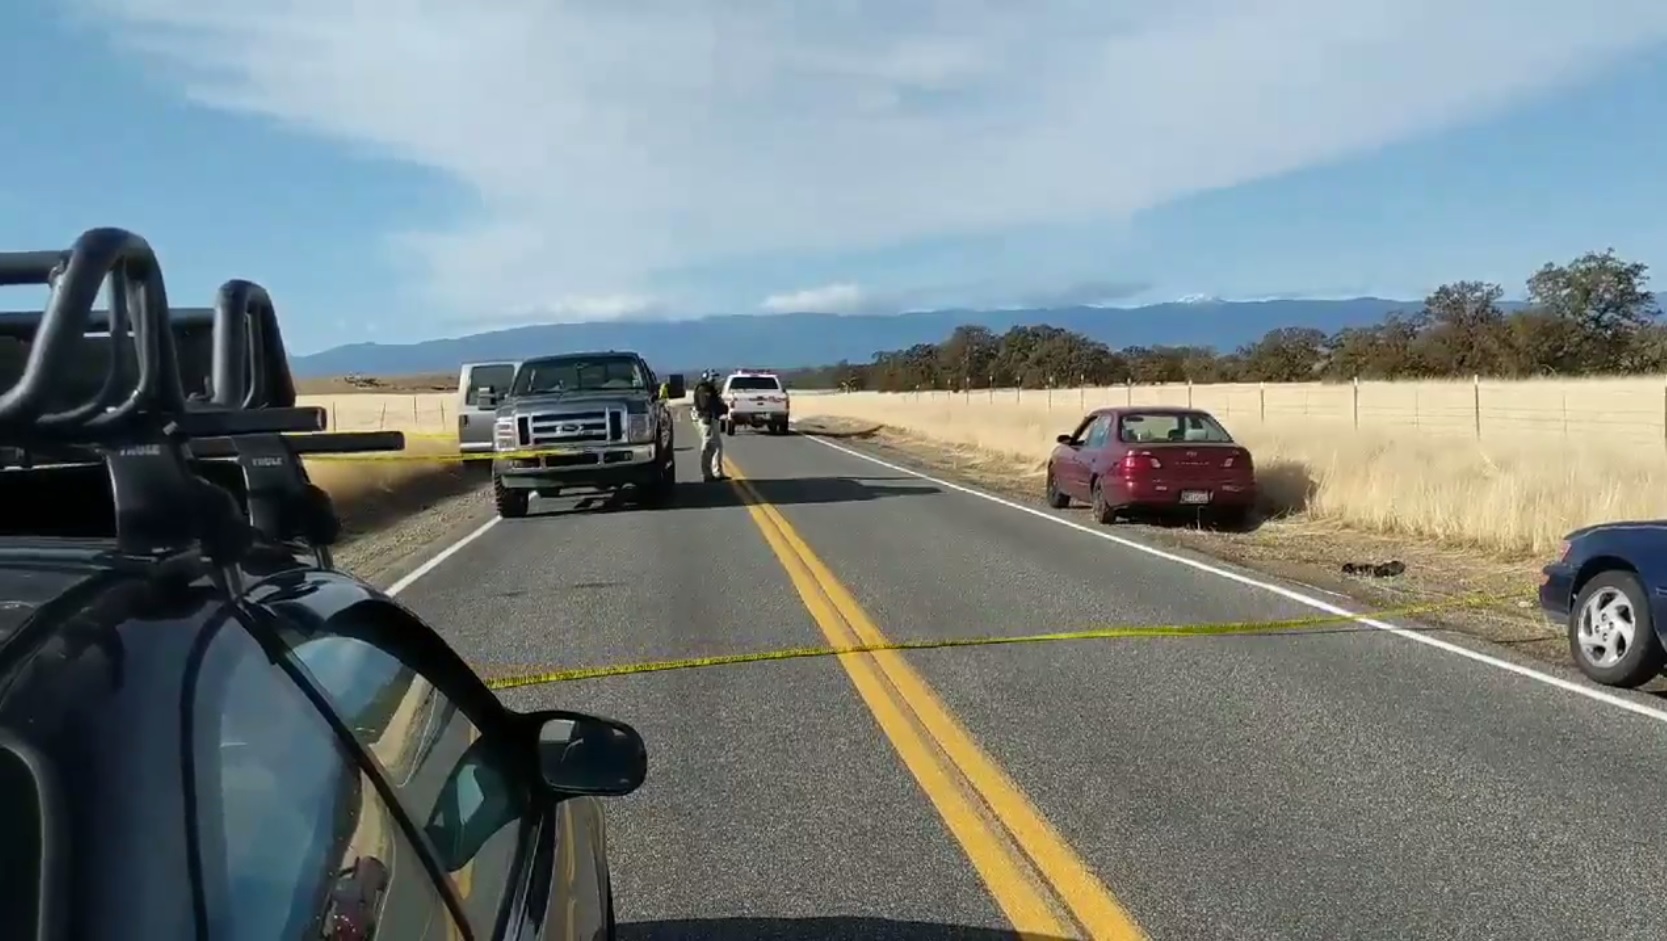 A roadblock was put in place following a shooting in the community of Rancho Tehama on November 14, 2017. (Sara Stinson/KHSL-TV)